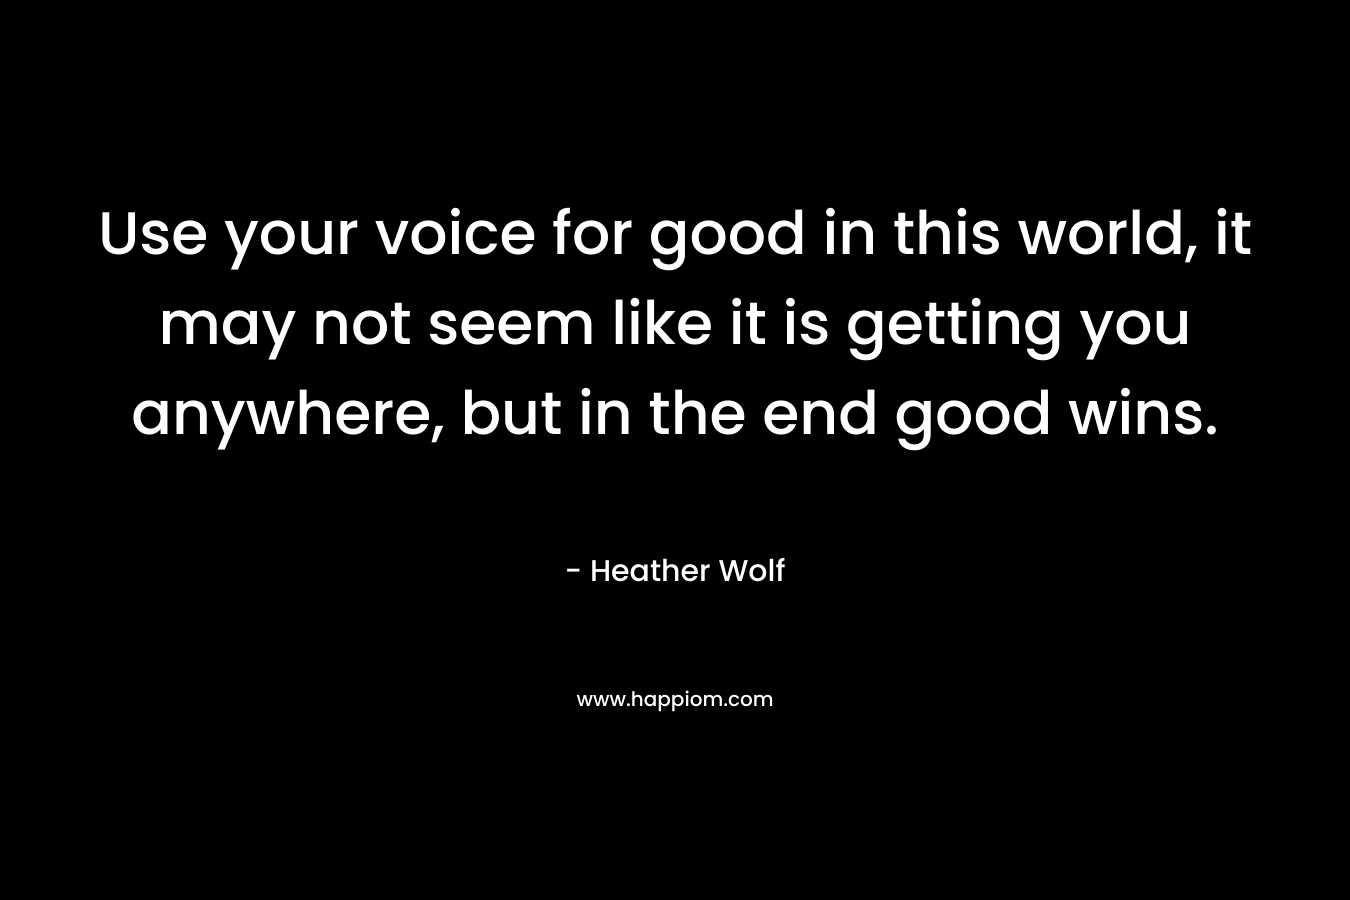 Use your voice for good in this world, it may not seem like it is getting you anywhere, but in the end good wins. – Heather Wolf